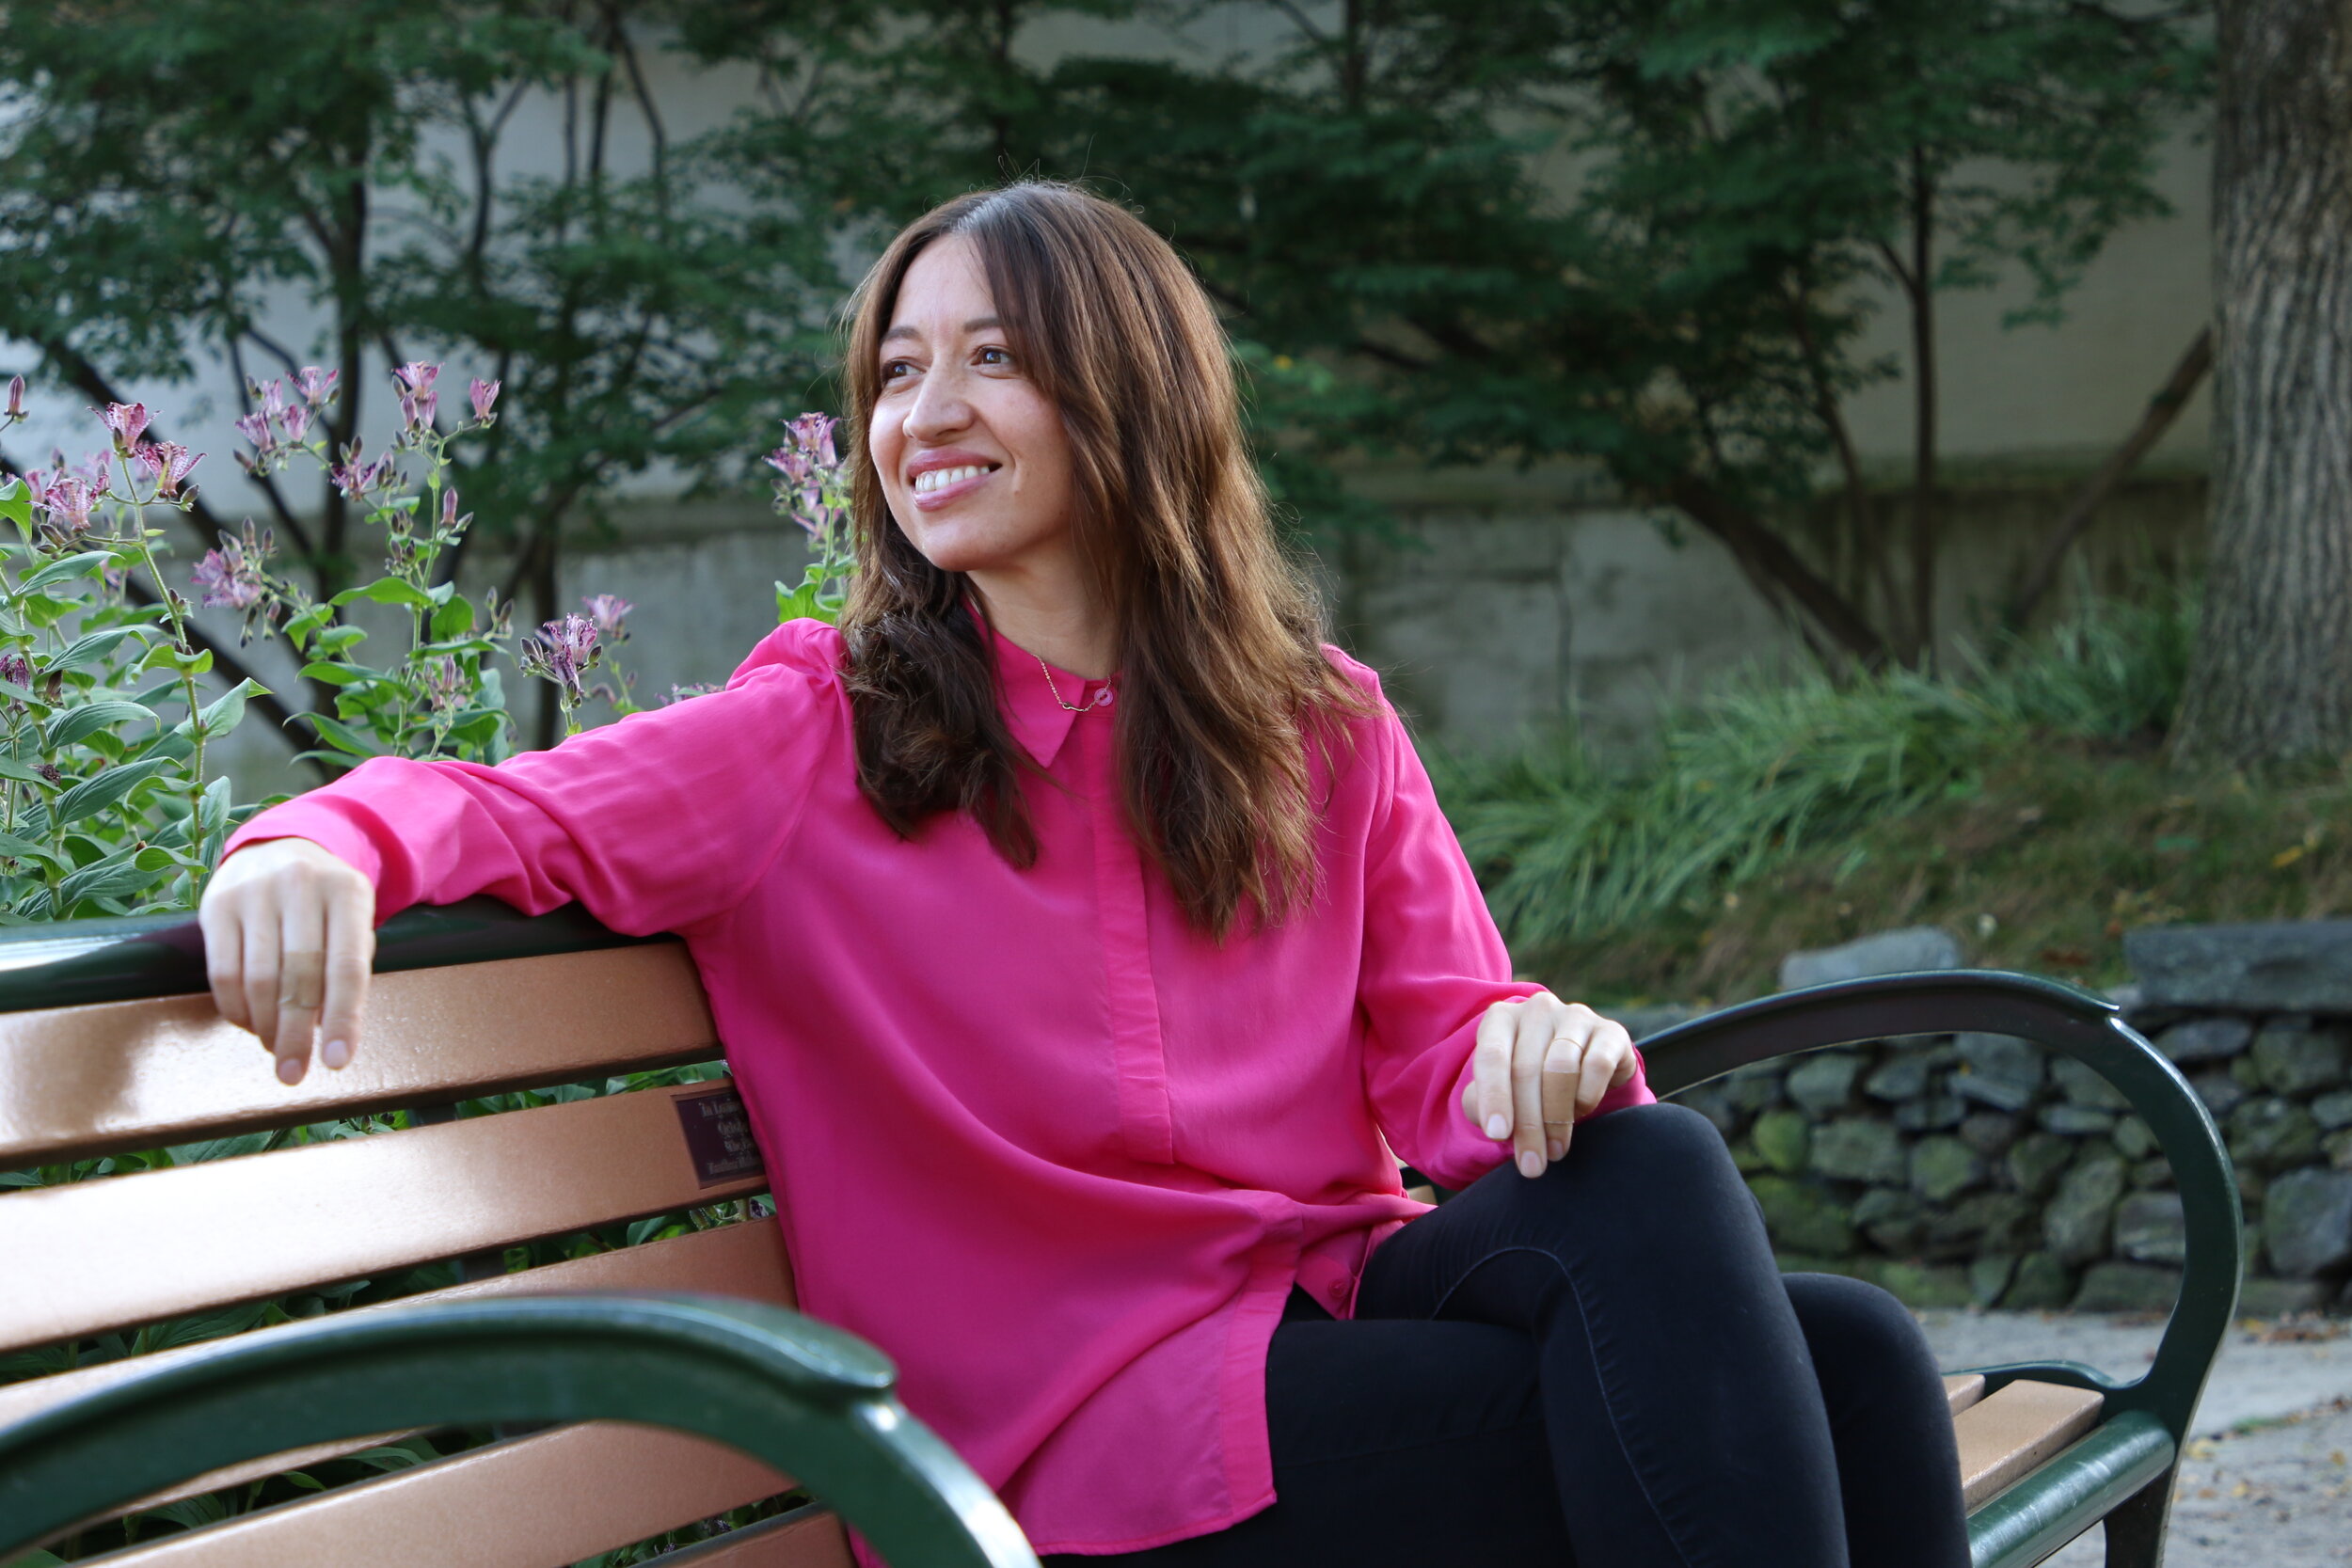 Alt text: a young asian american woman sits on a park bench and smiles while looking off camera. She has medium-length brown hair over her shoulders and is wearing a fuschia button down blouse with bl